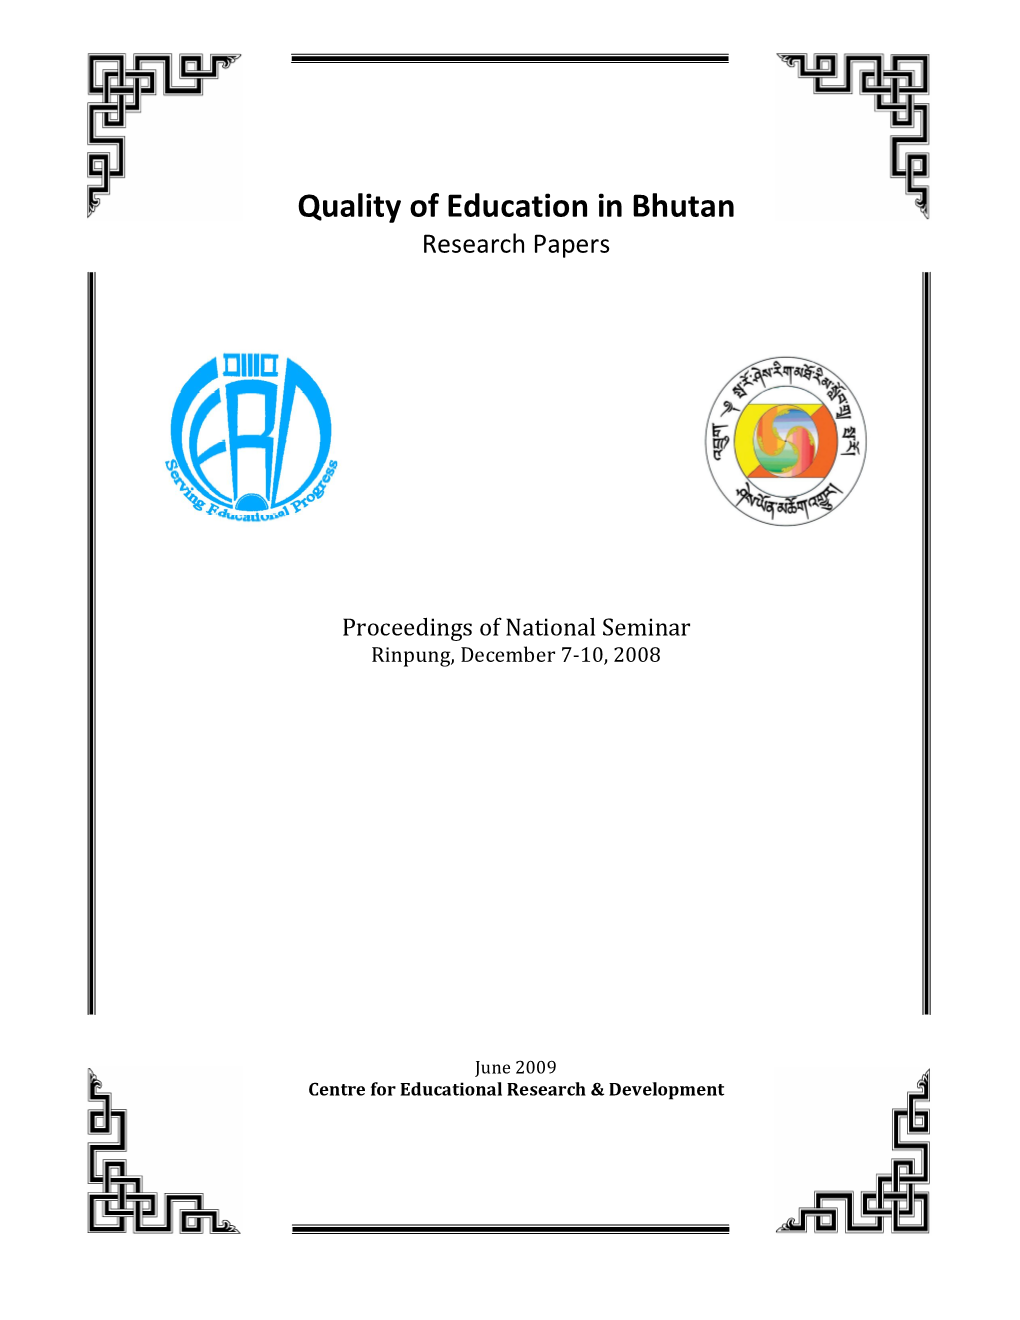 Quality of Education in Bhutan Research Papers